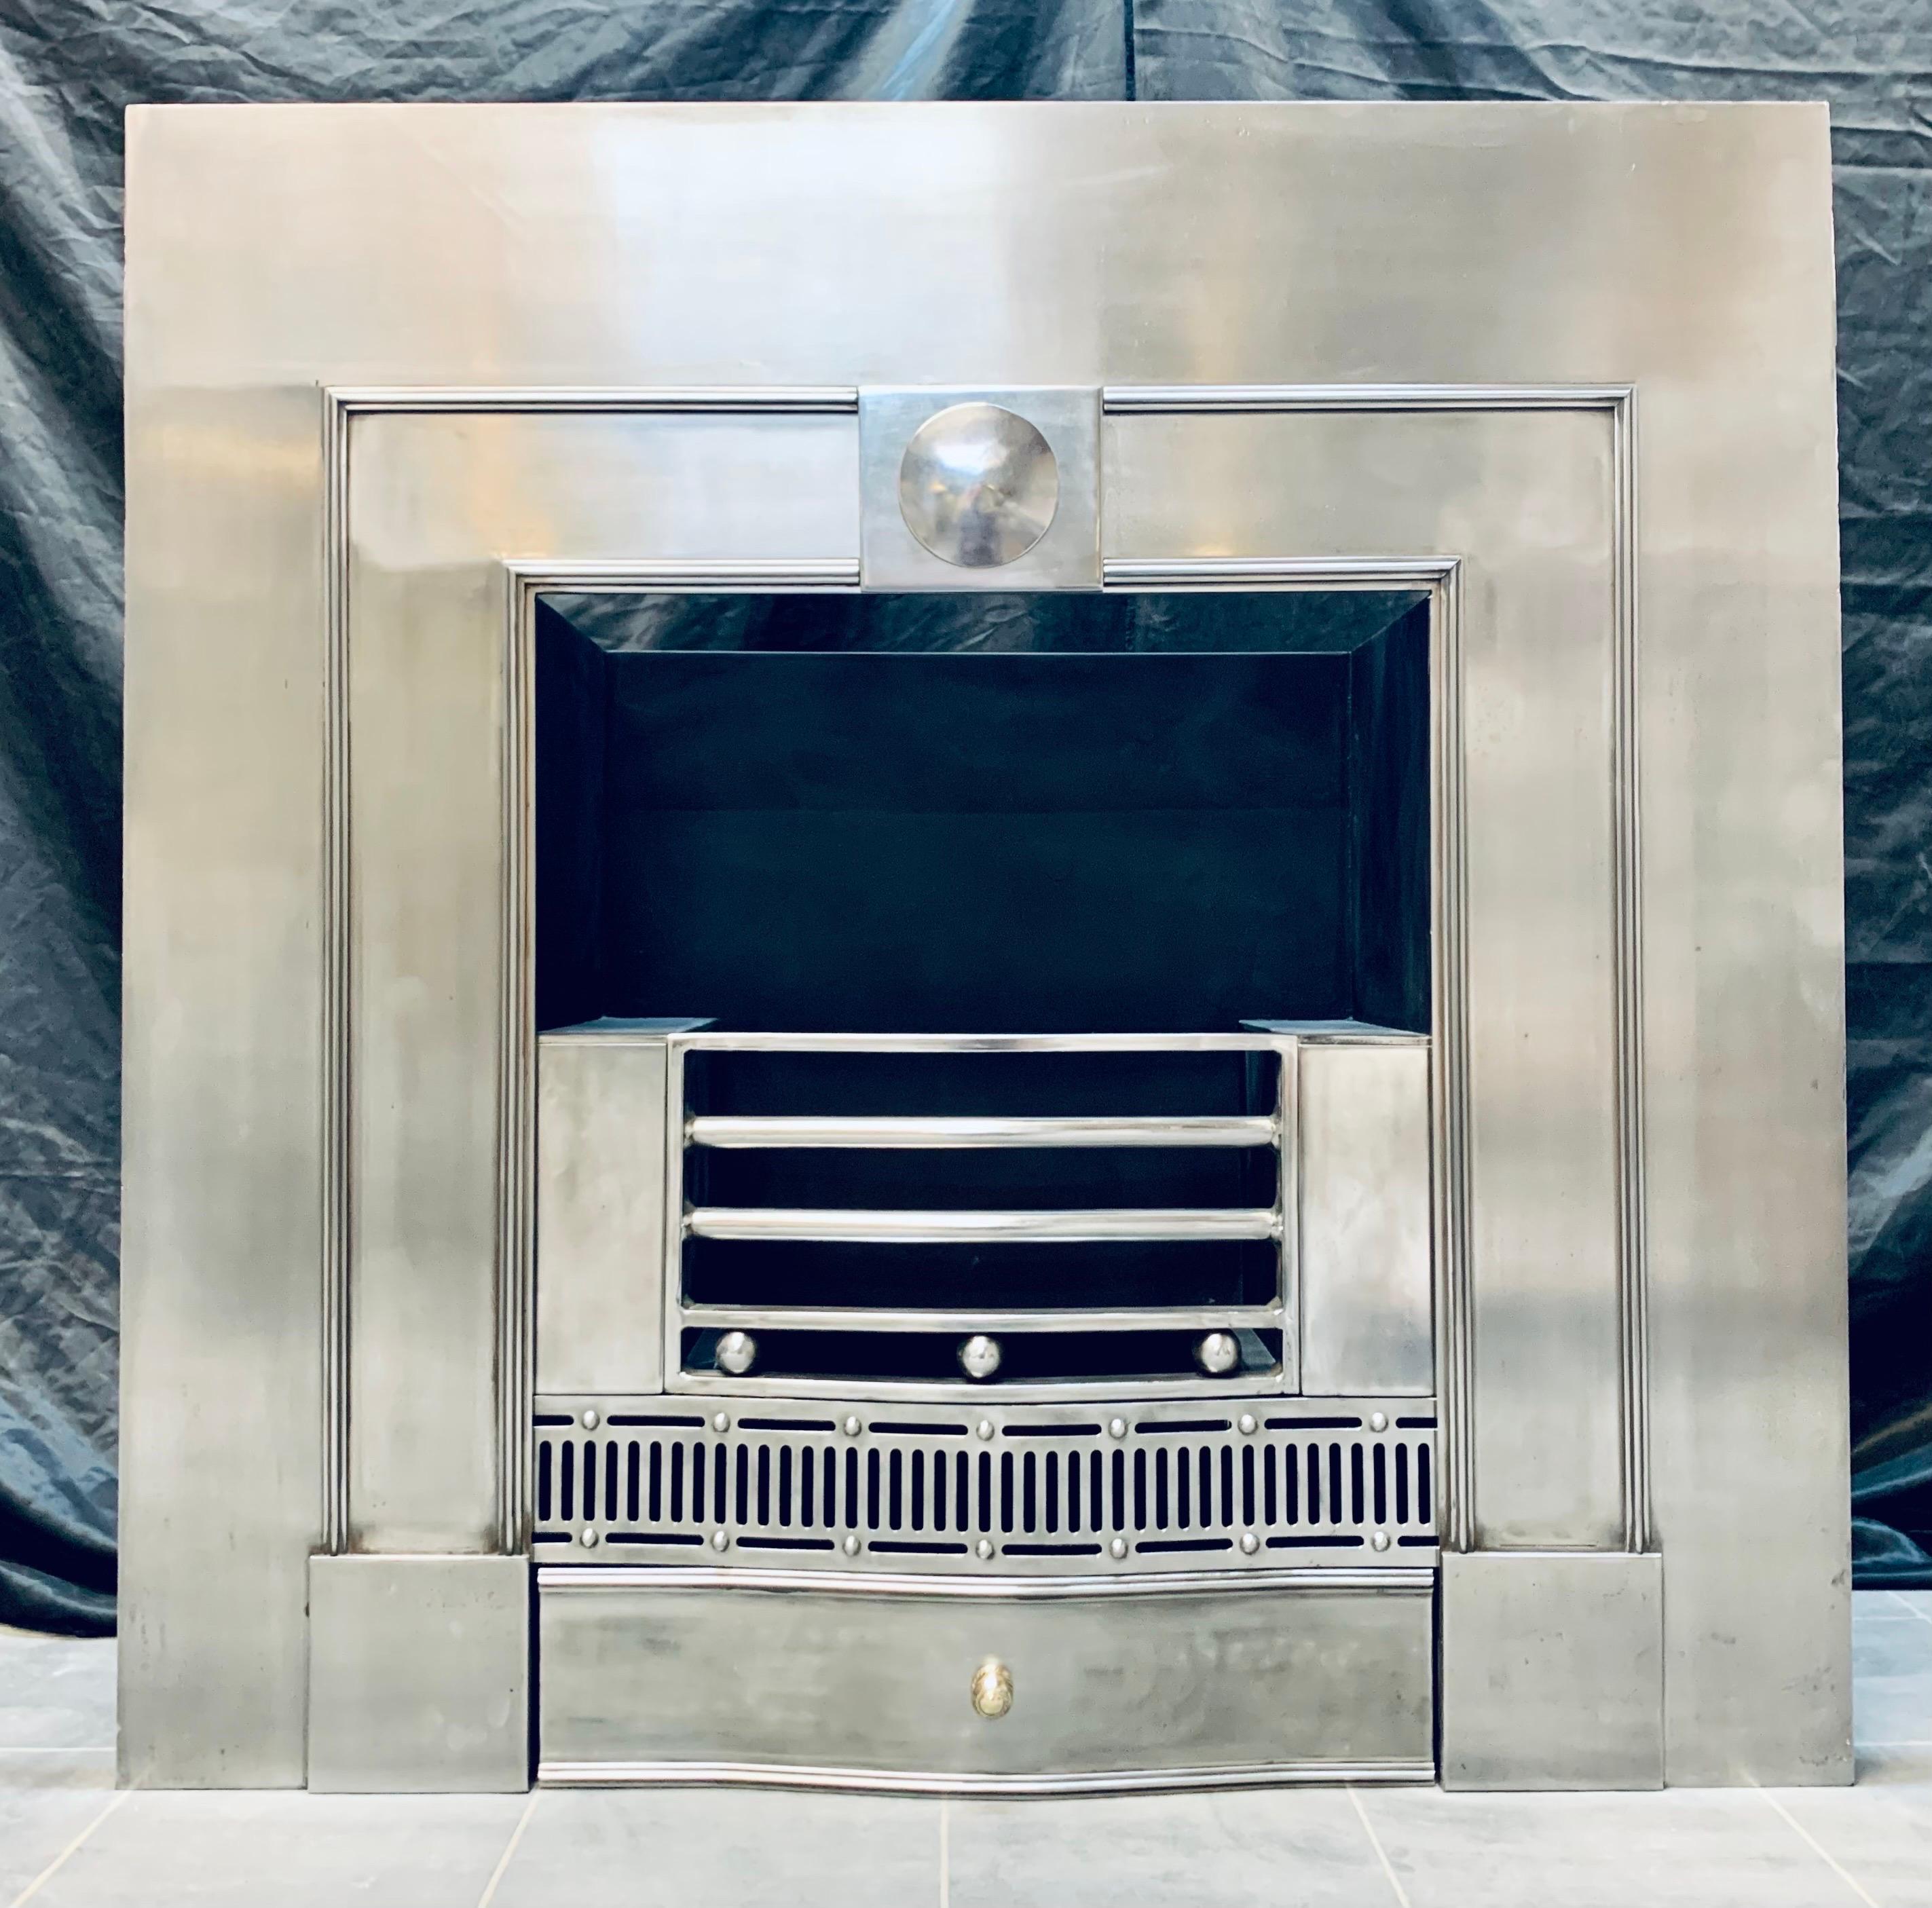 A 19th Century Georgian manner polished steel fireplace insert. A generous polished outer plate with an applied raised lambs tongue moulding, encompassing a central tablet with a projecting polished disc.
The four bared shaped fire front complete